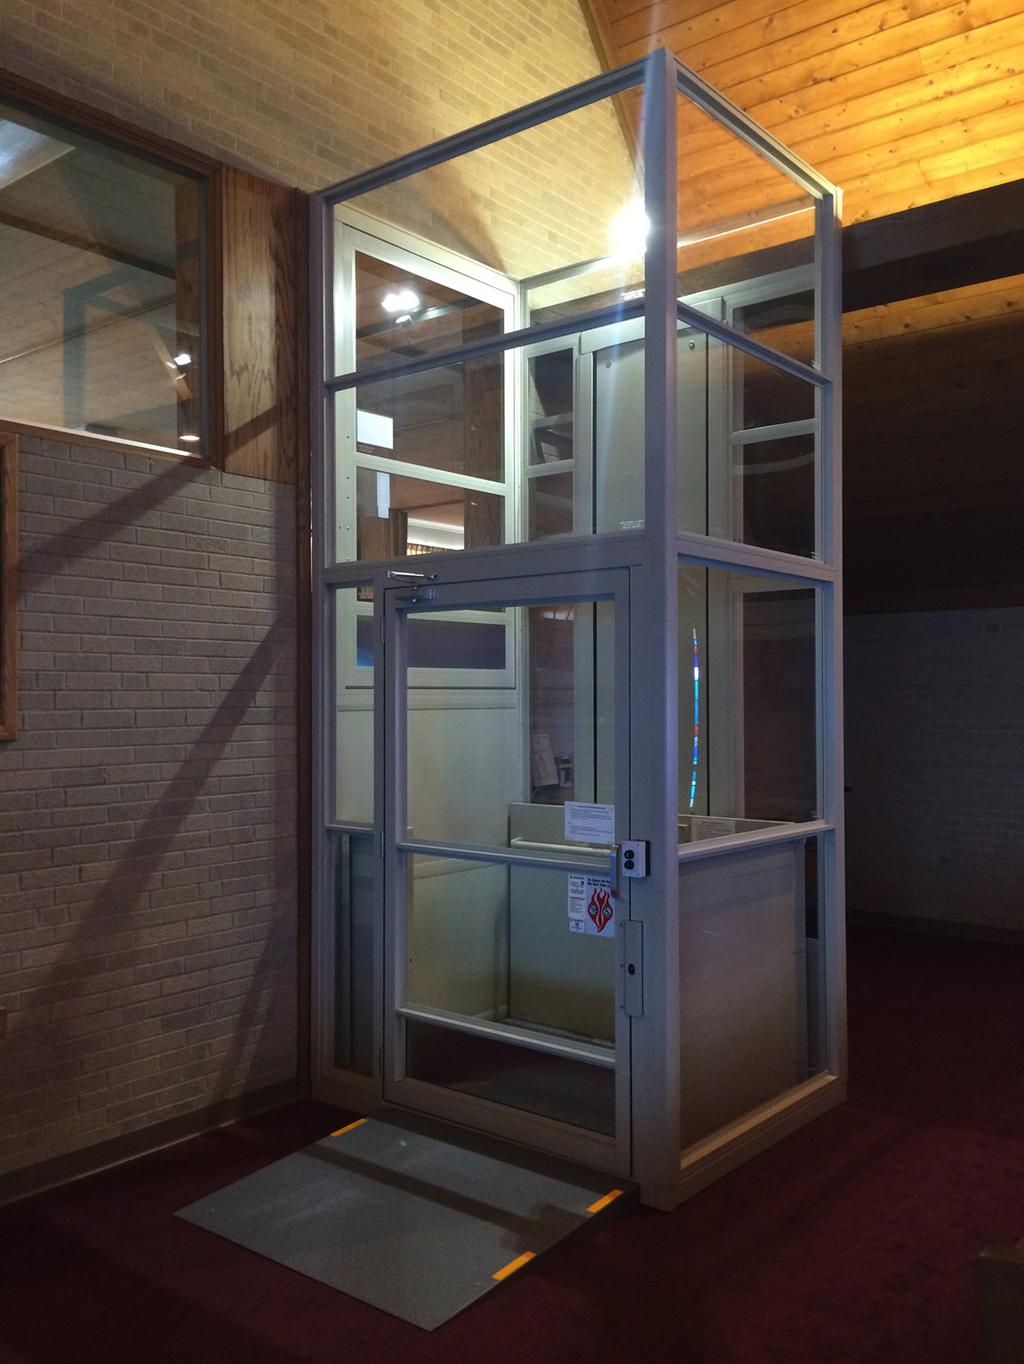 Types of lifts 1. Shaft way model (enclosure made by general contractor) 2. Enclosure model (enclosure provided by lift manufacturer) 3.